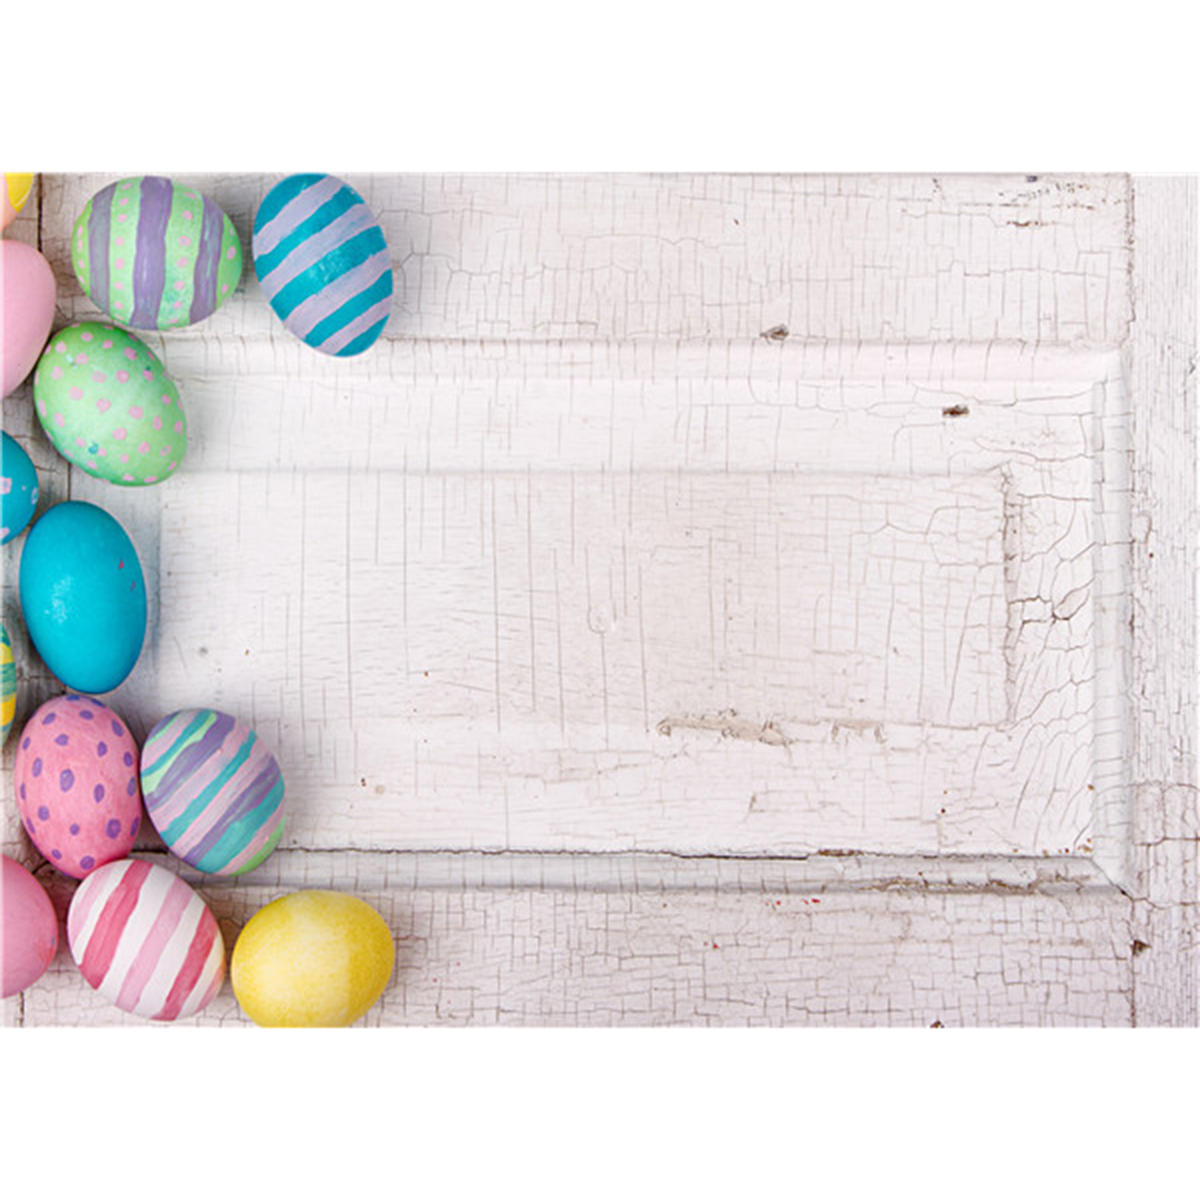 5x7FT Vinyl Easter Egg White Wall Photography Backdrop Background Studio Prop